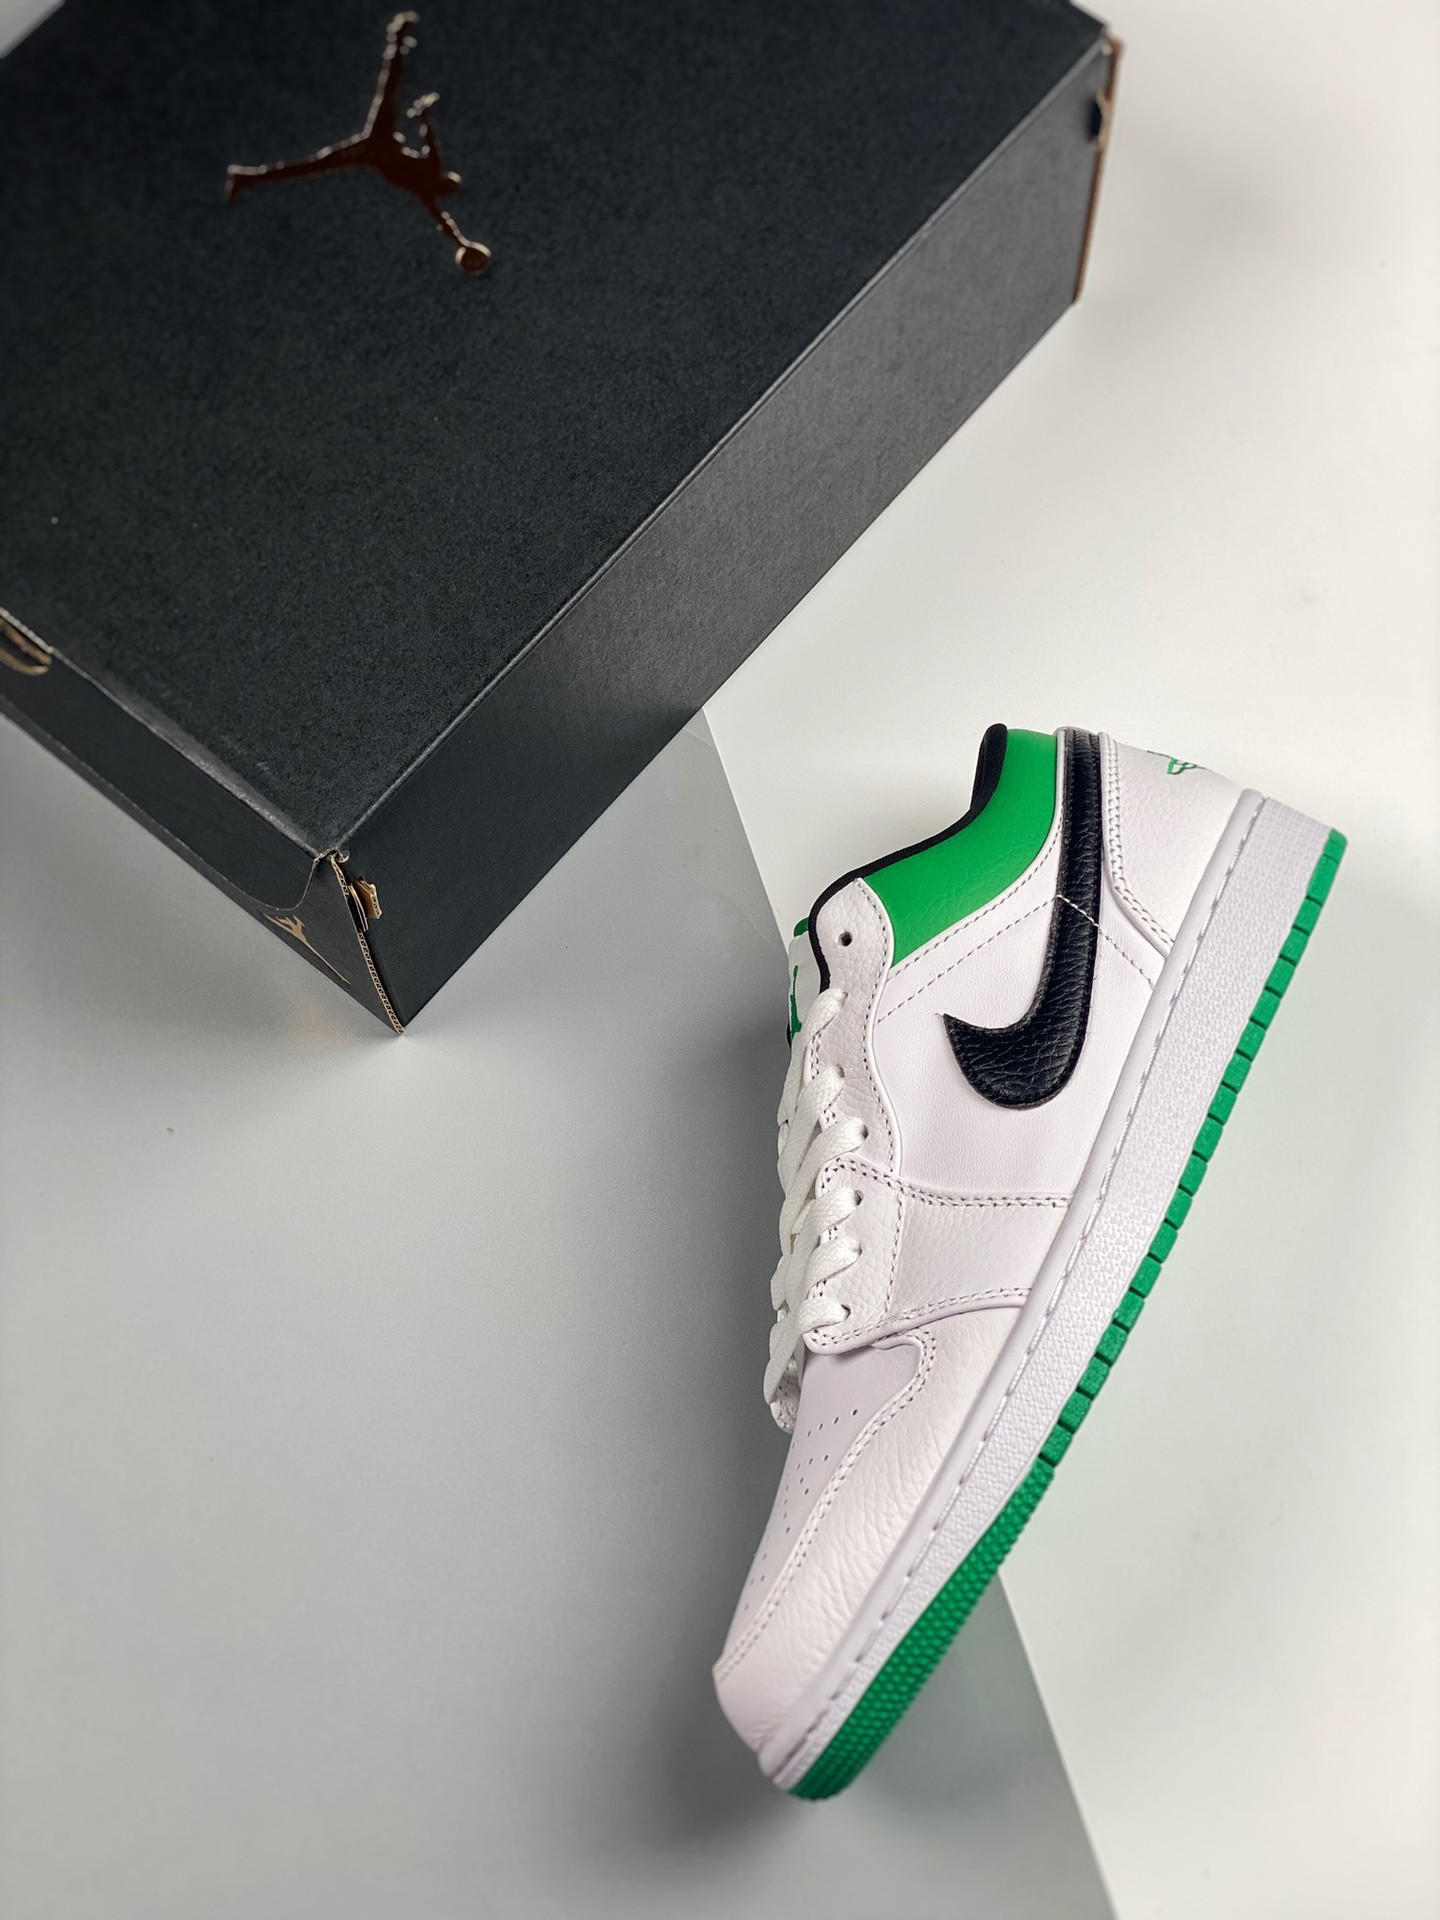 Air Jordan 1 Low Lucky Green White 553558-129 For Sale